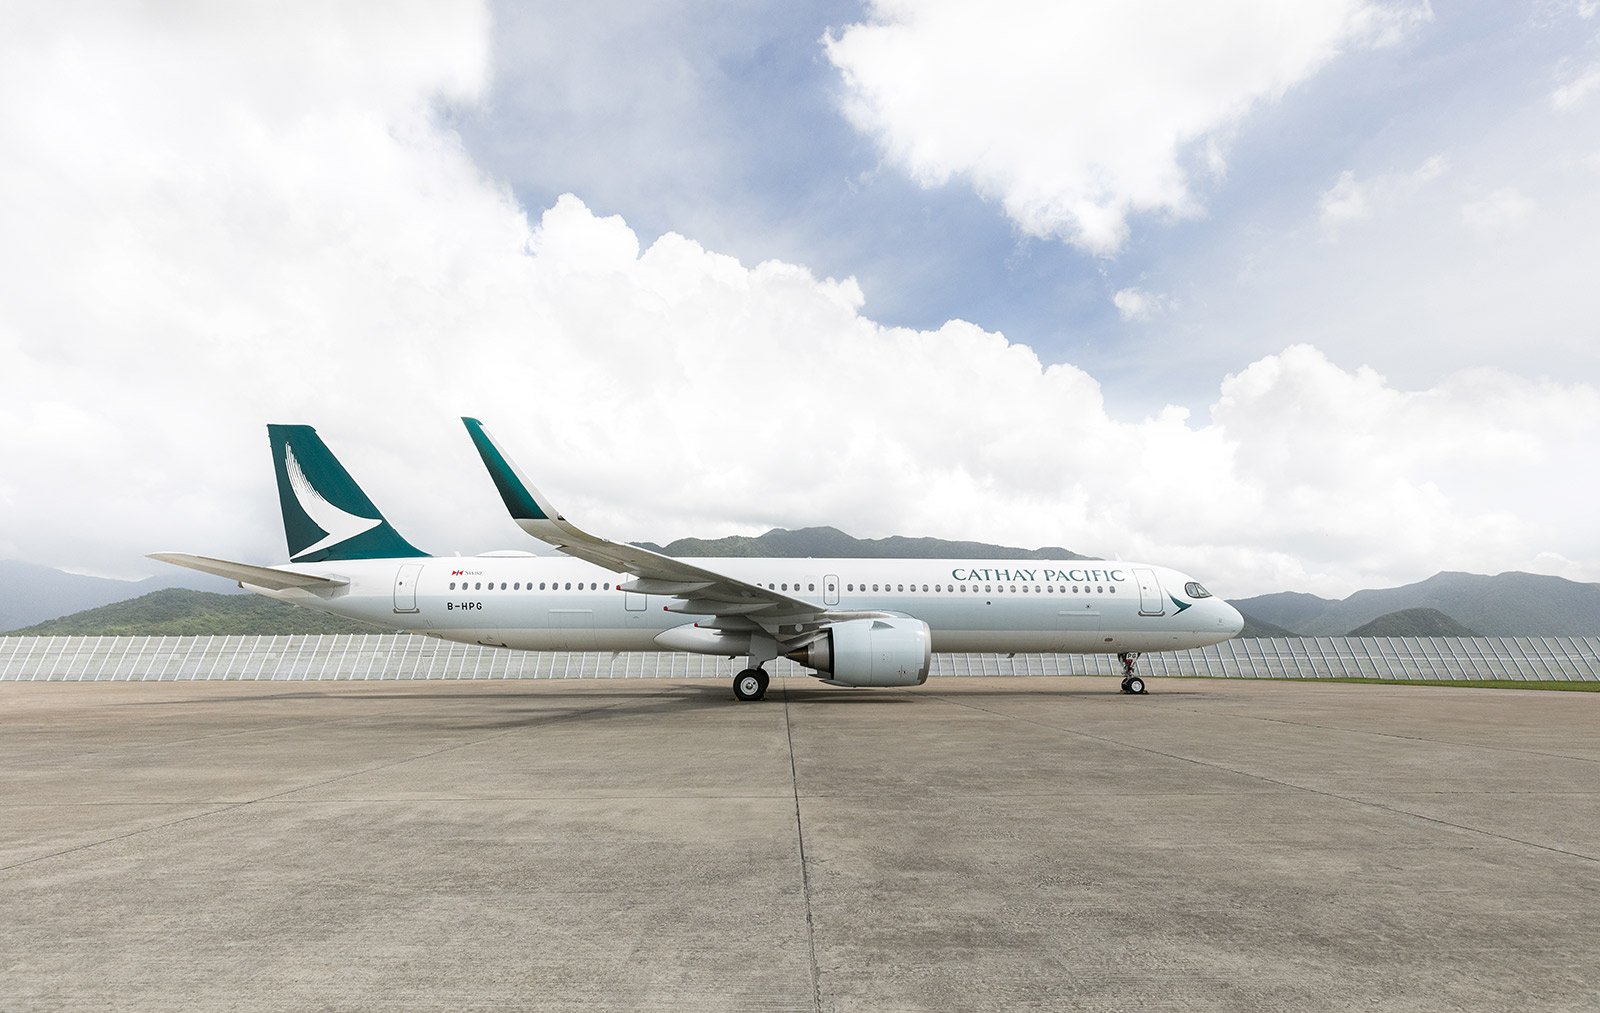 A side view of Cathay Pacific's new Airbus A321neo plane